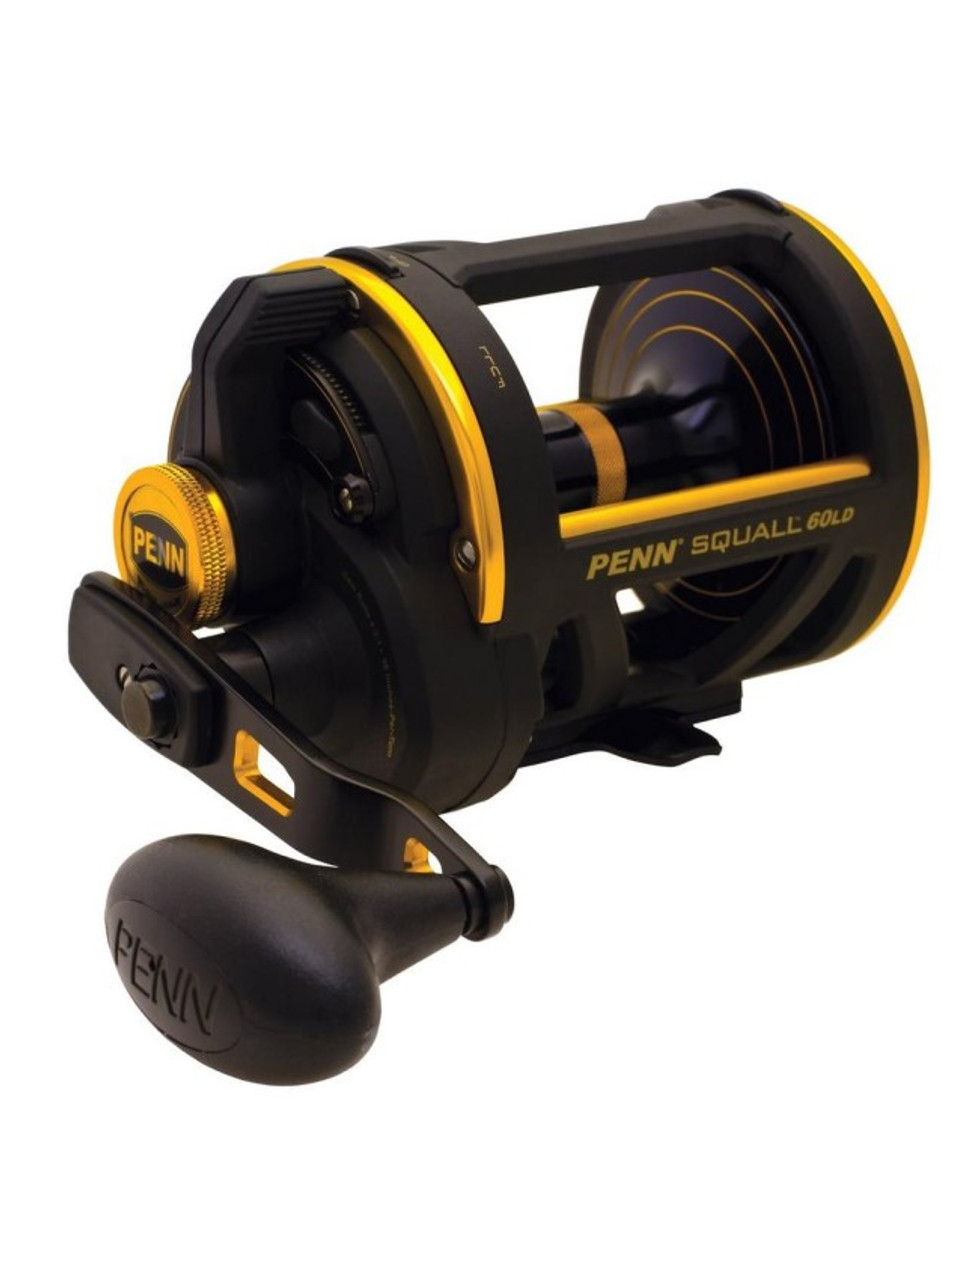 Fishing - Reels - Conventional Reels - Star Drag Reels - Page 2 - The  Harbour Chandler